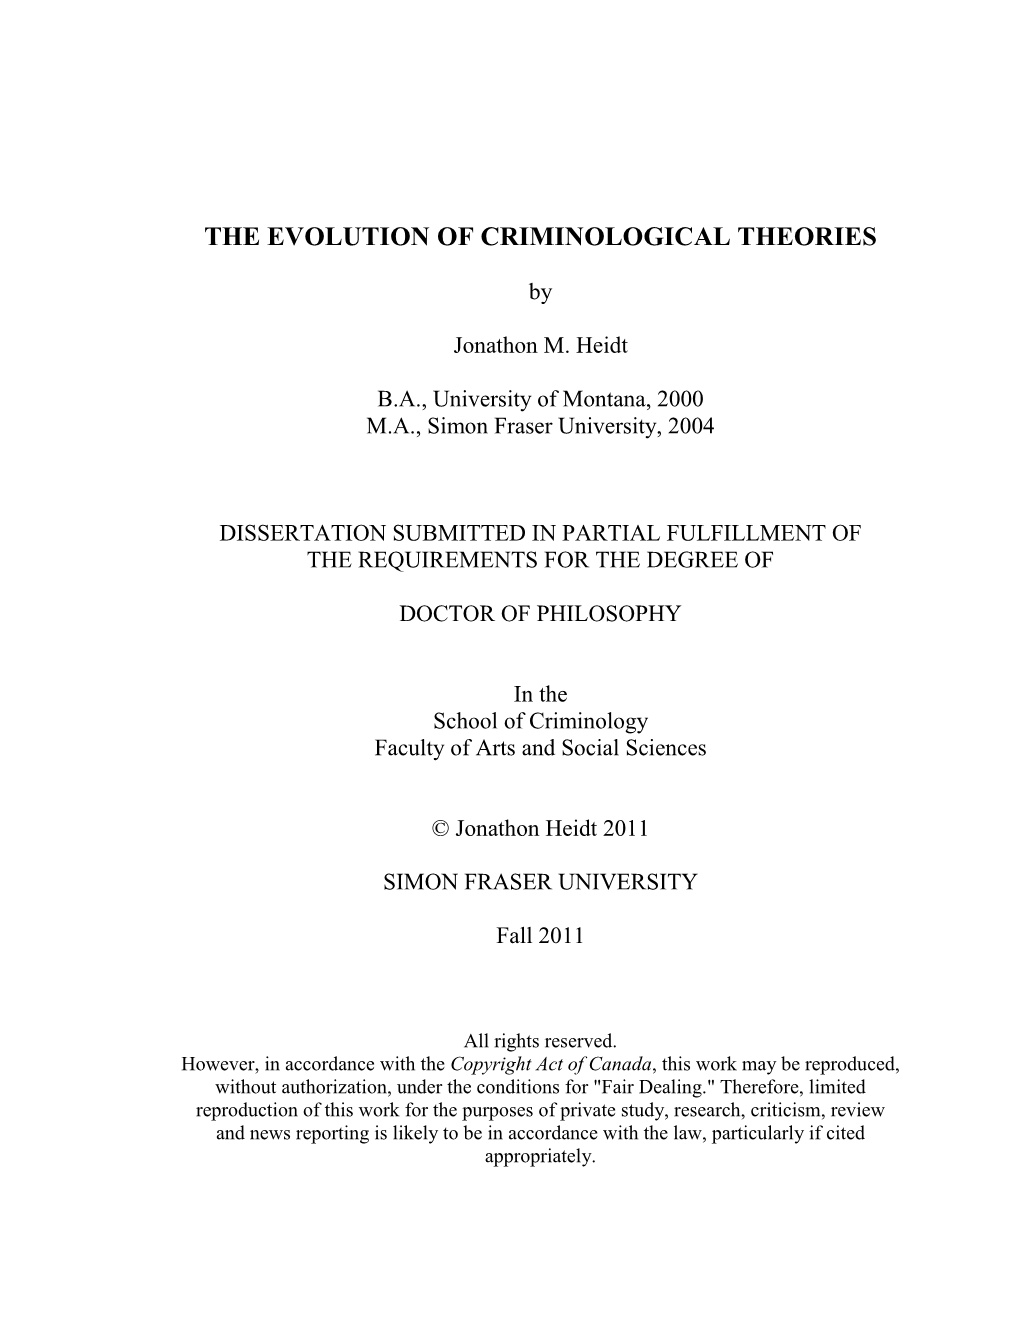 The Evolution of Criminological Theories